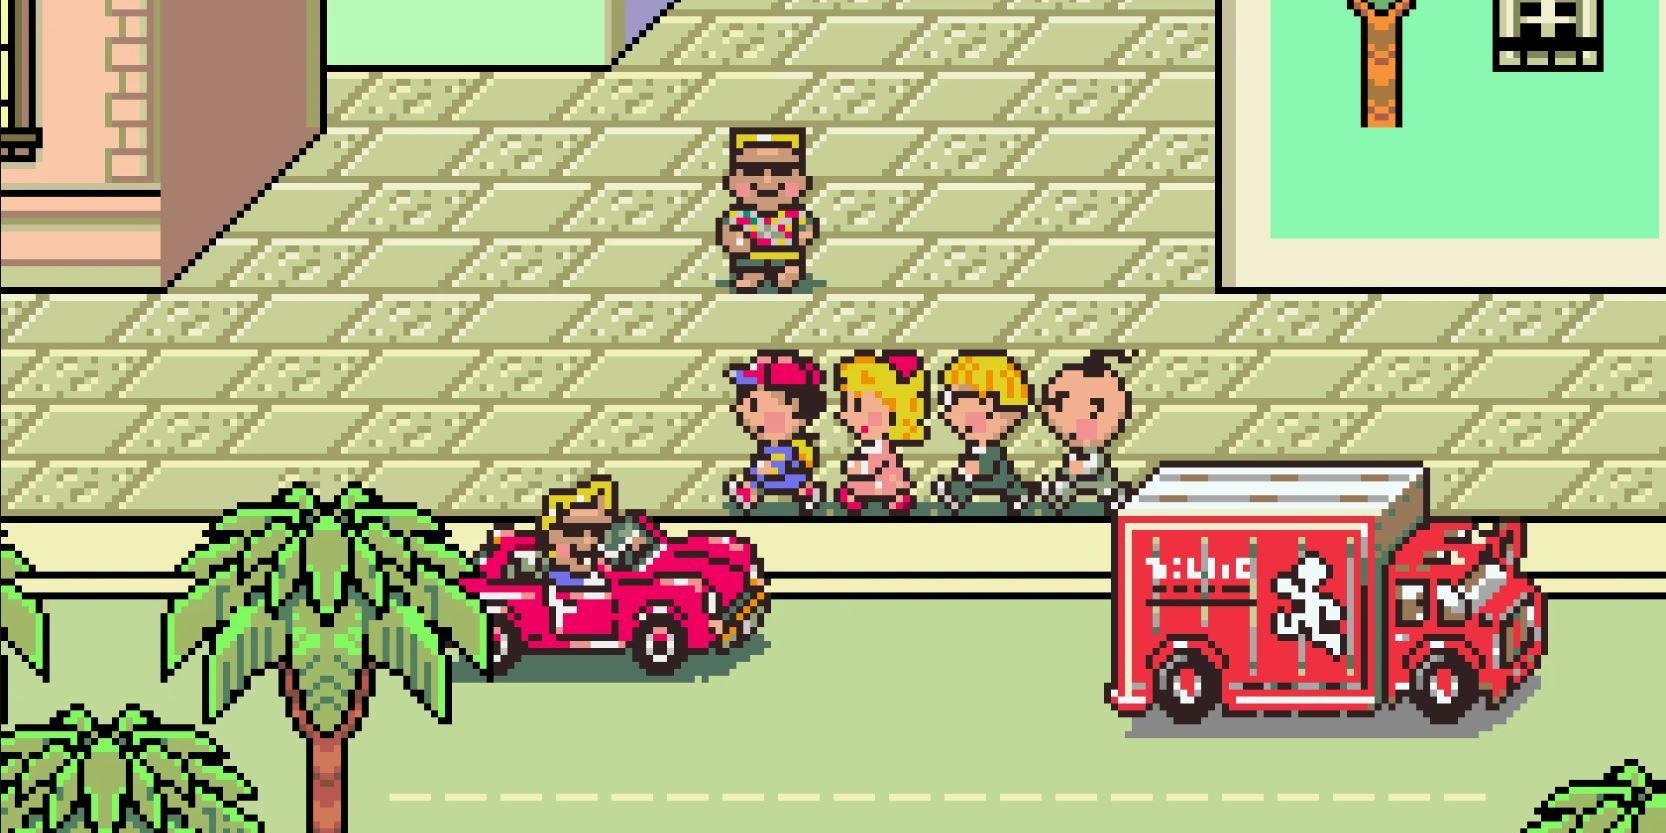 Ness and his friends walking in an area of EarthBound